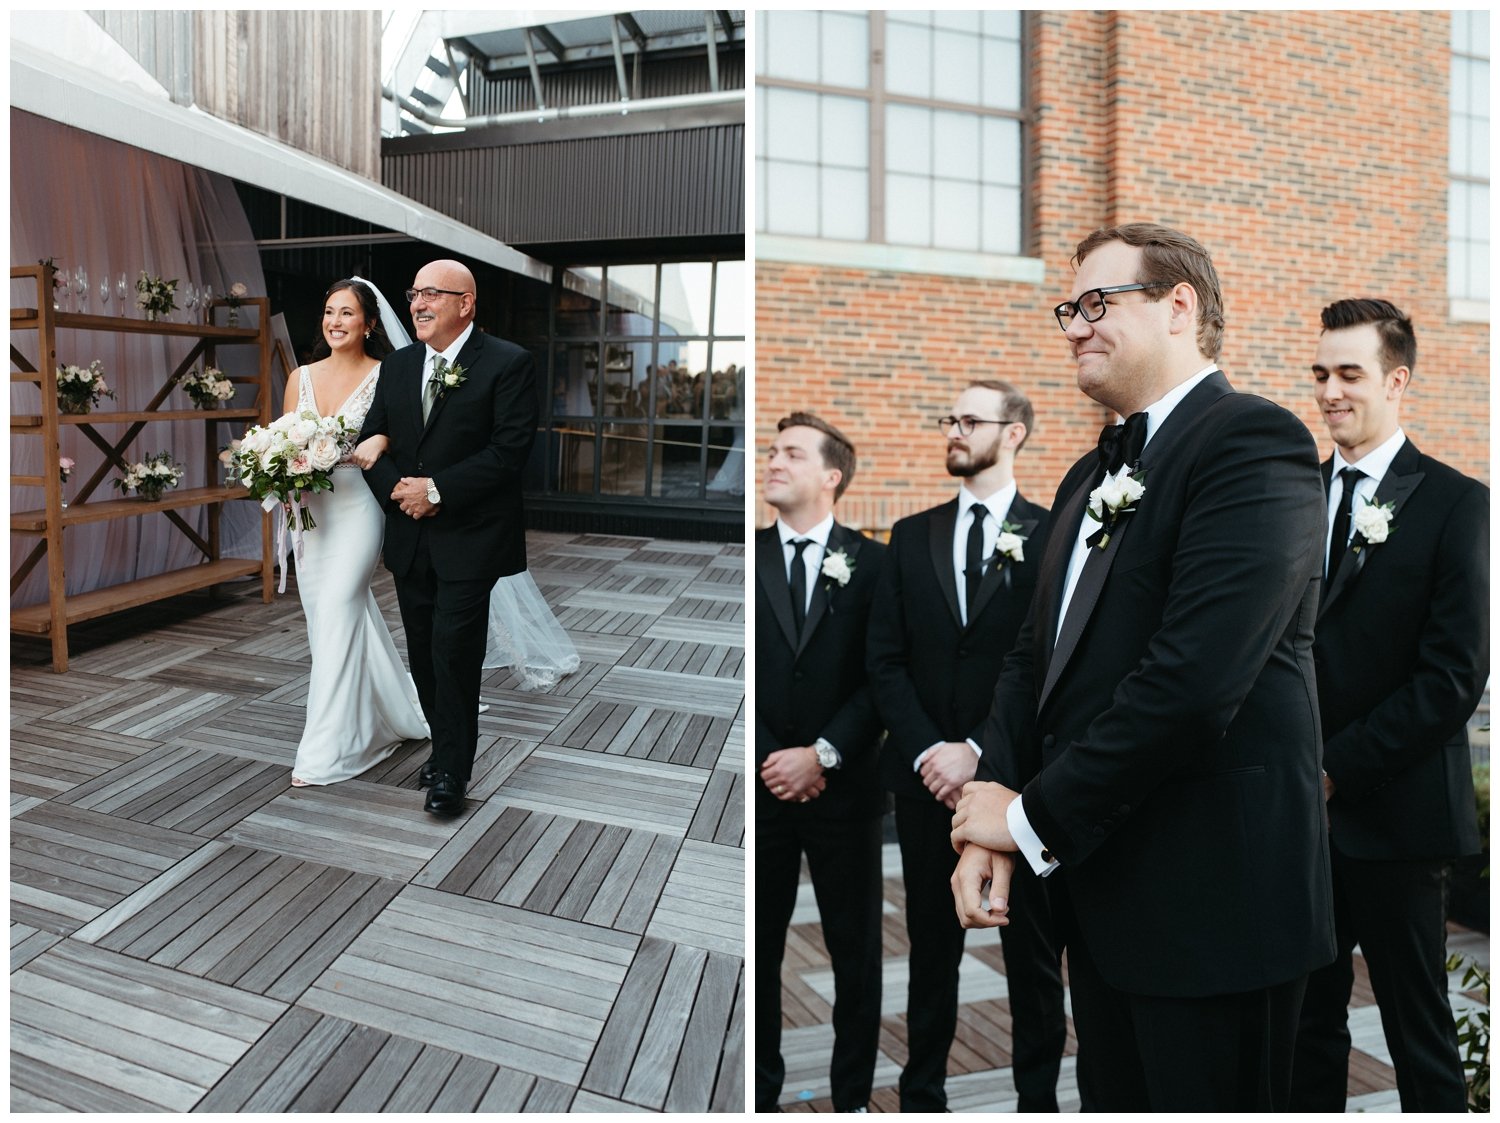 The bride's father walks her up the aisle at her Ponce City Market wedding